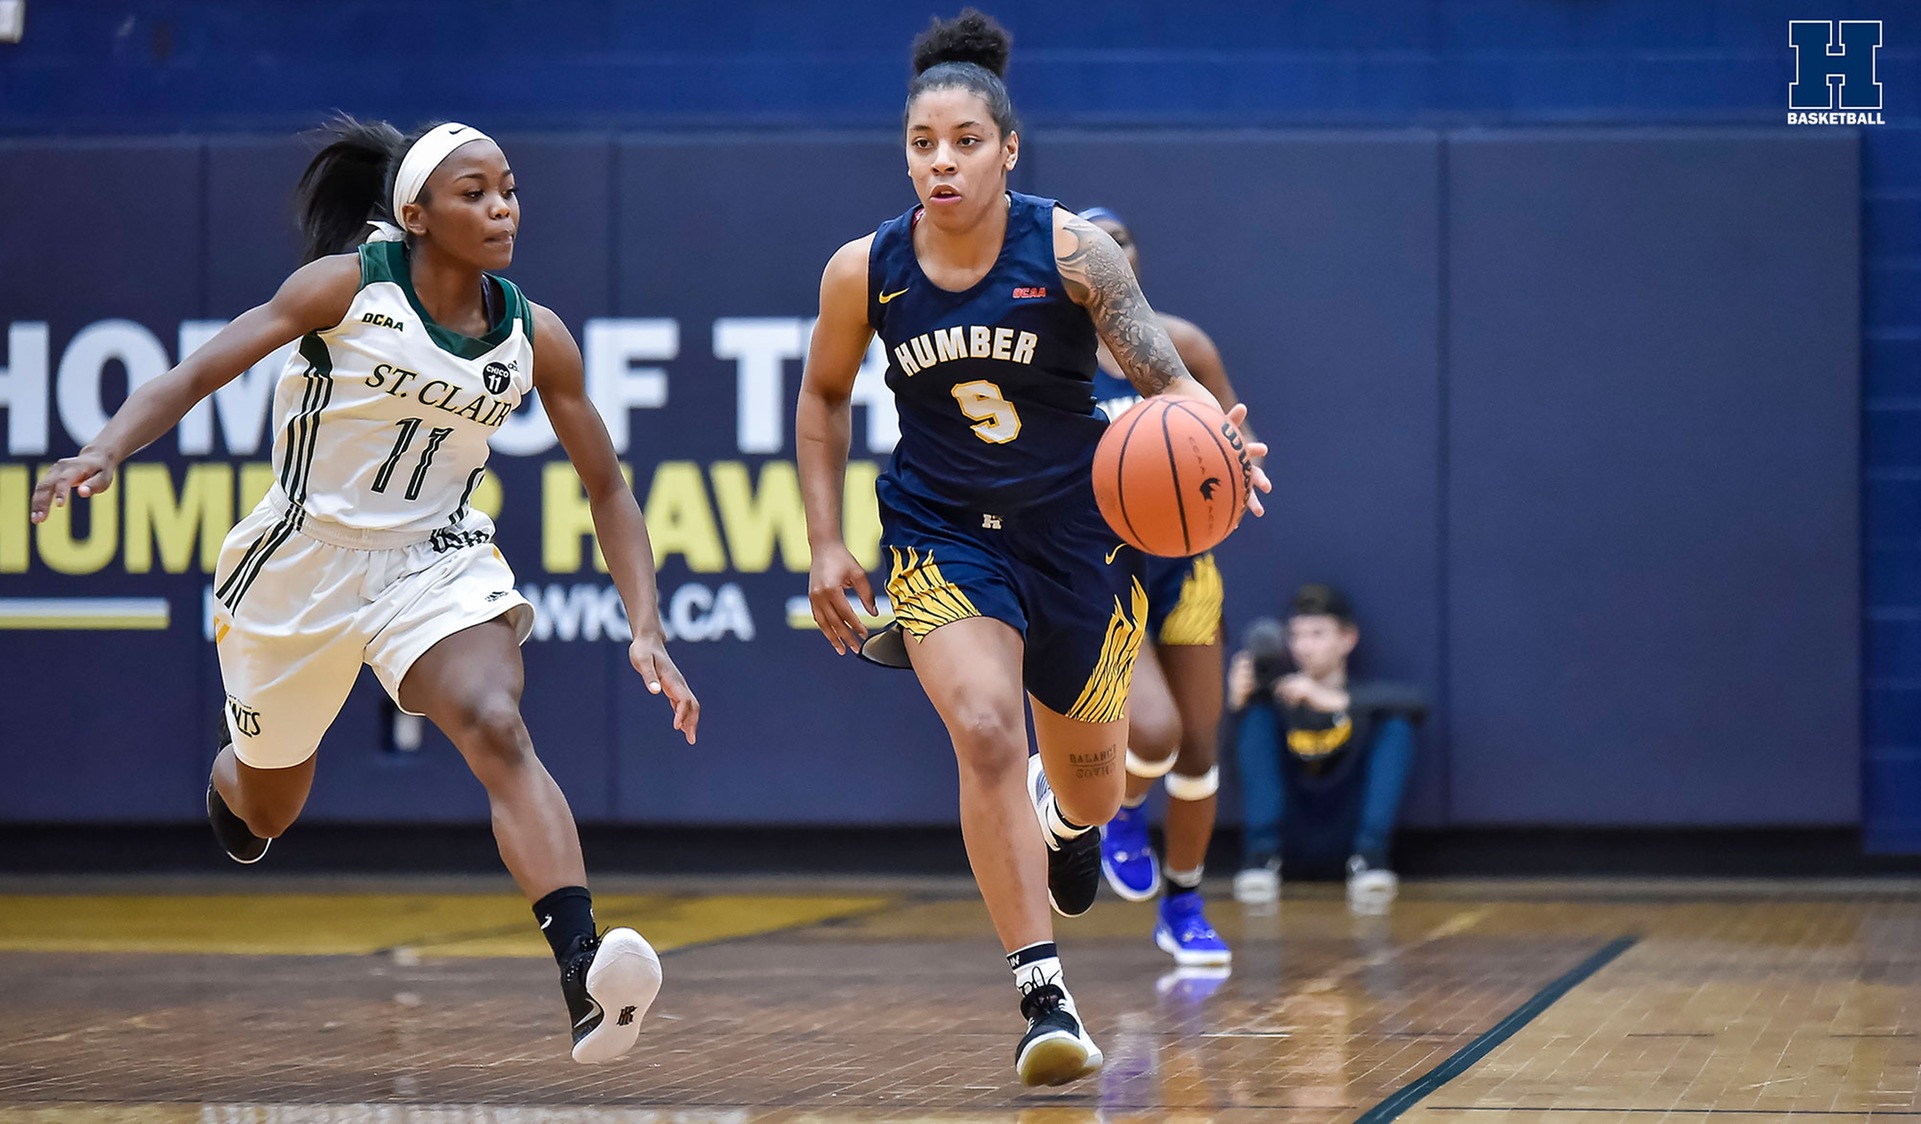 No. 8 Women's Basketball Wins Road Game Over No. 14 St. Clair